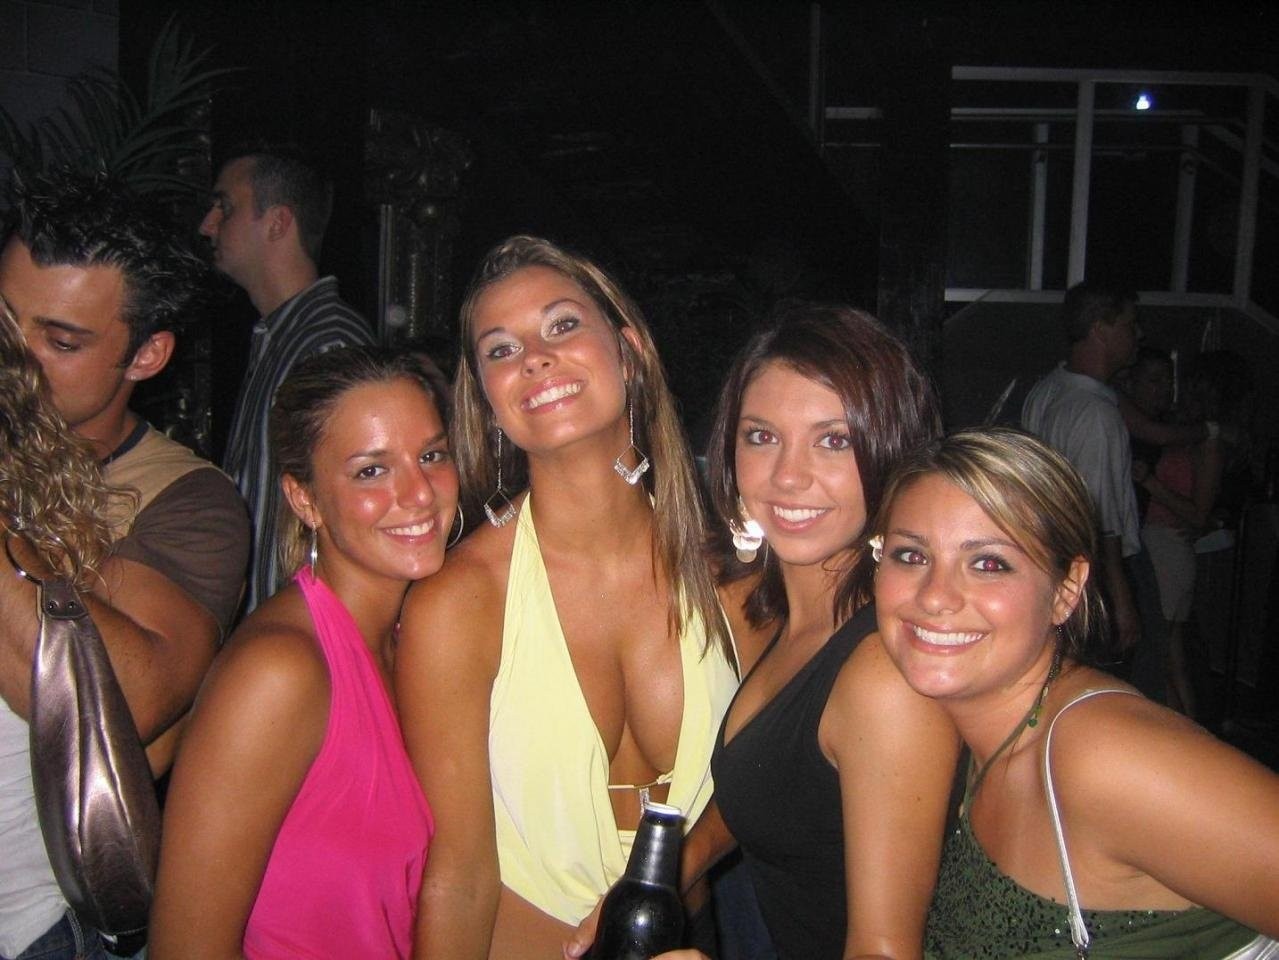 Drunk Naked College Coeds Party And Flash Perky Tits #76400933